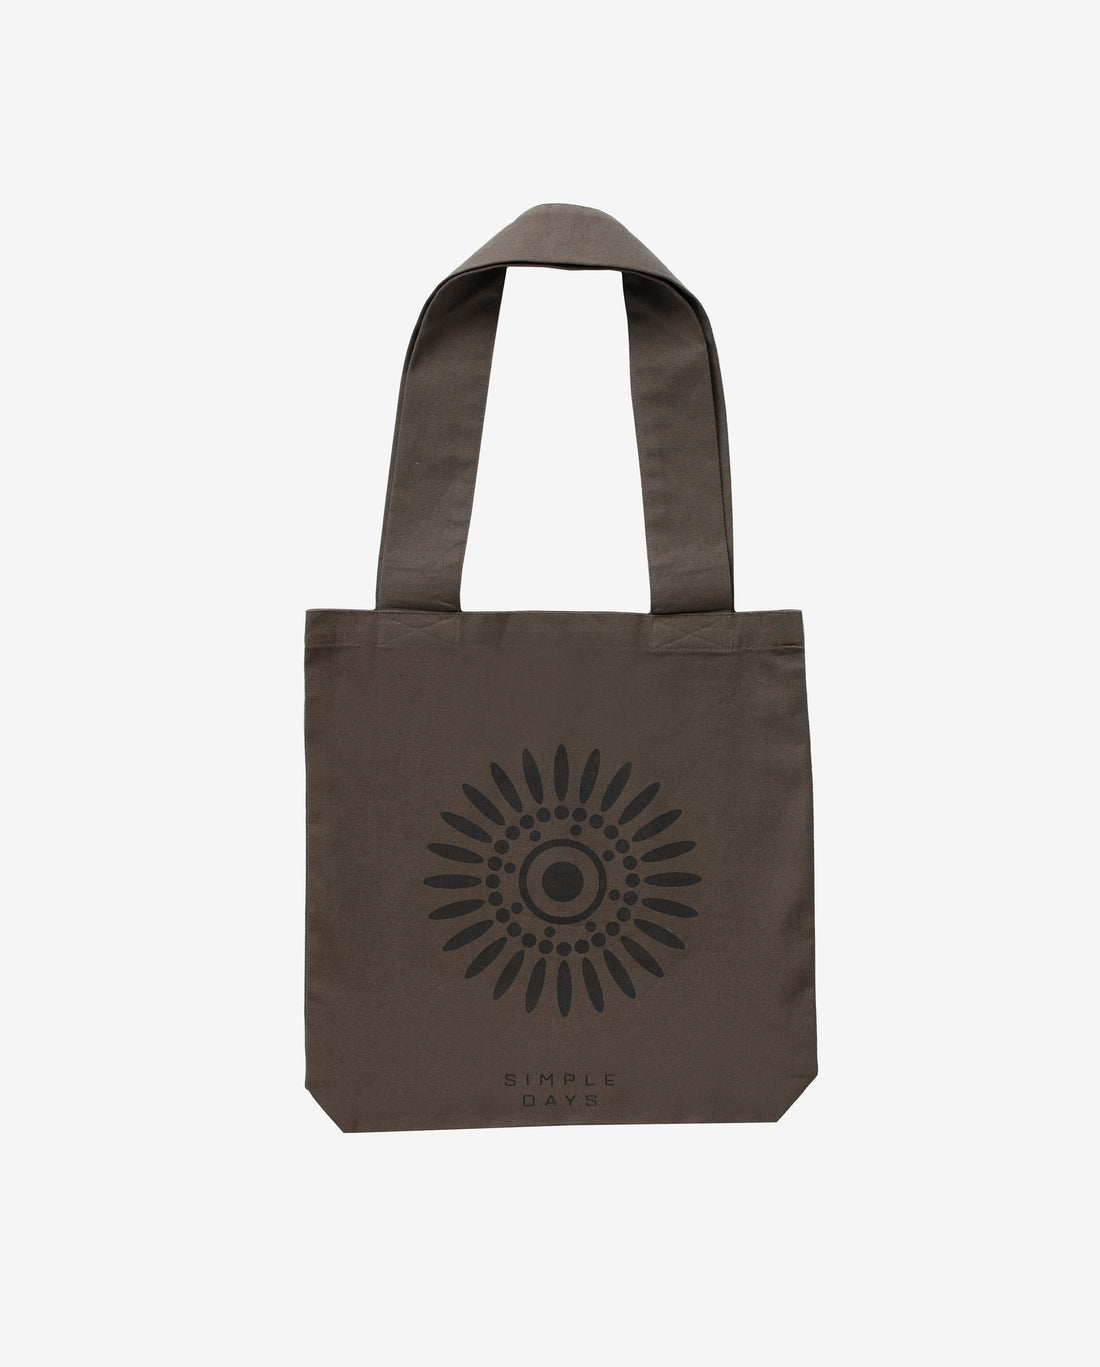 Nordal A/S Tote Bag Simple Days - Brown